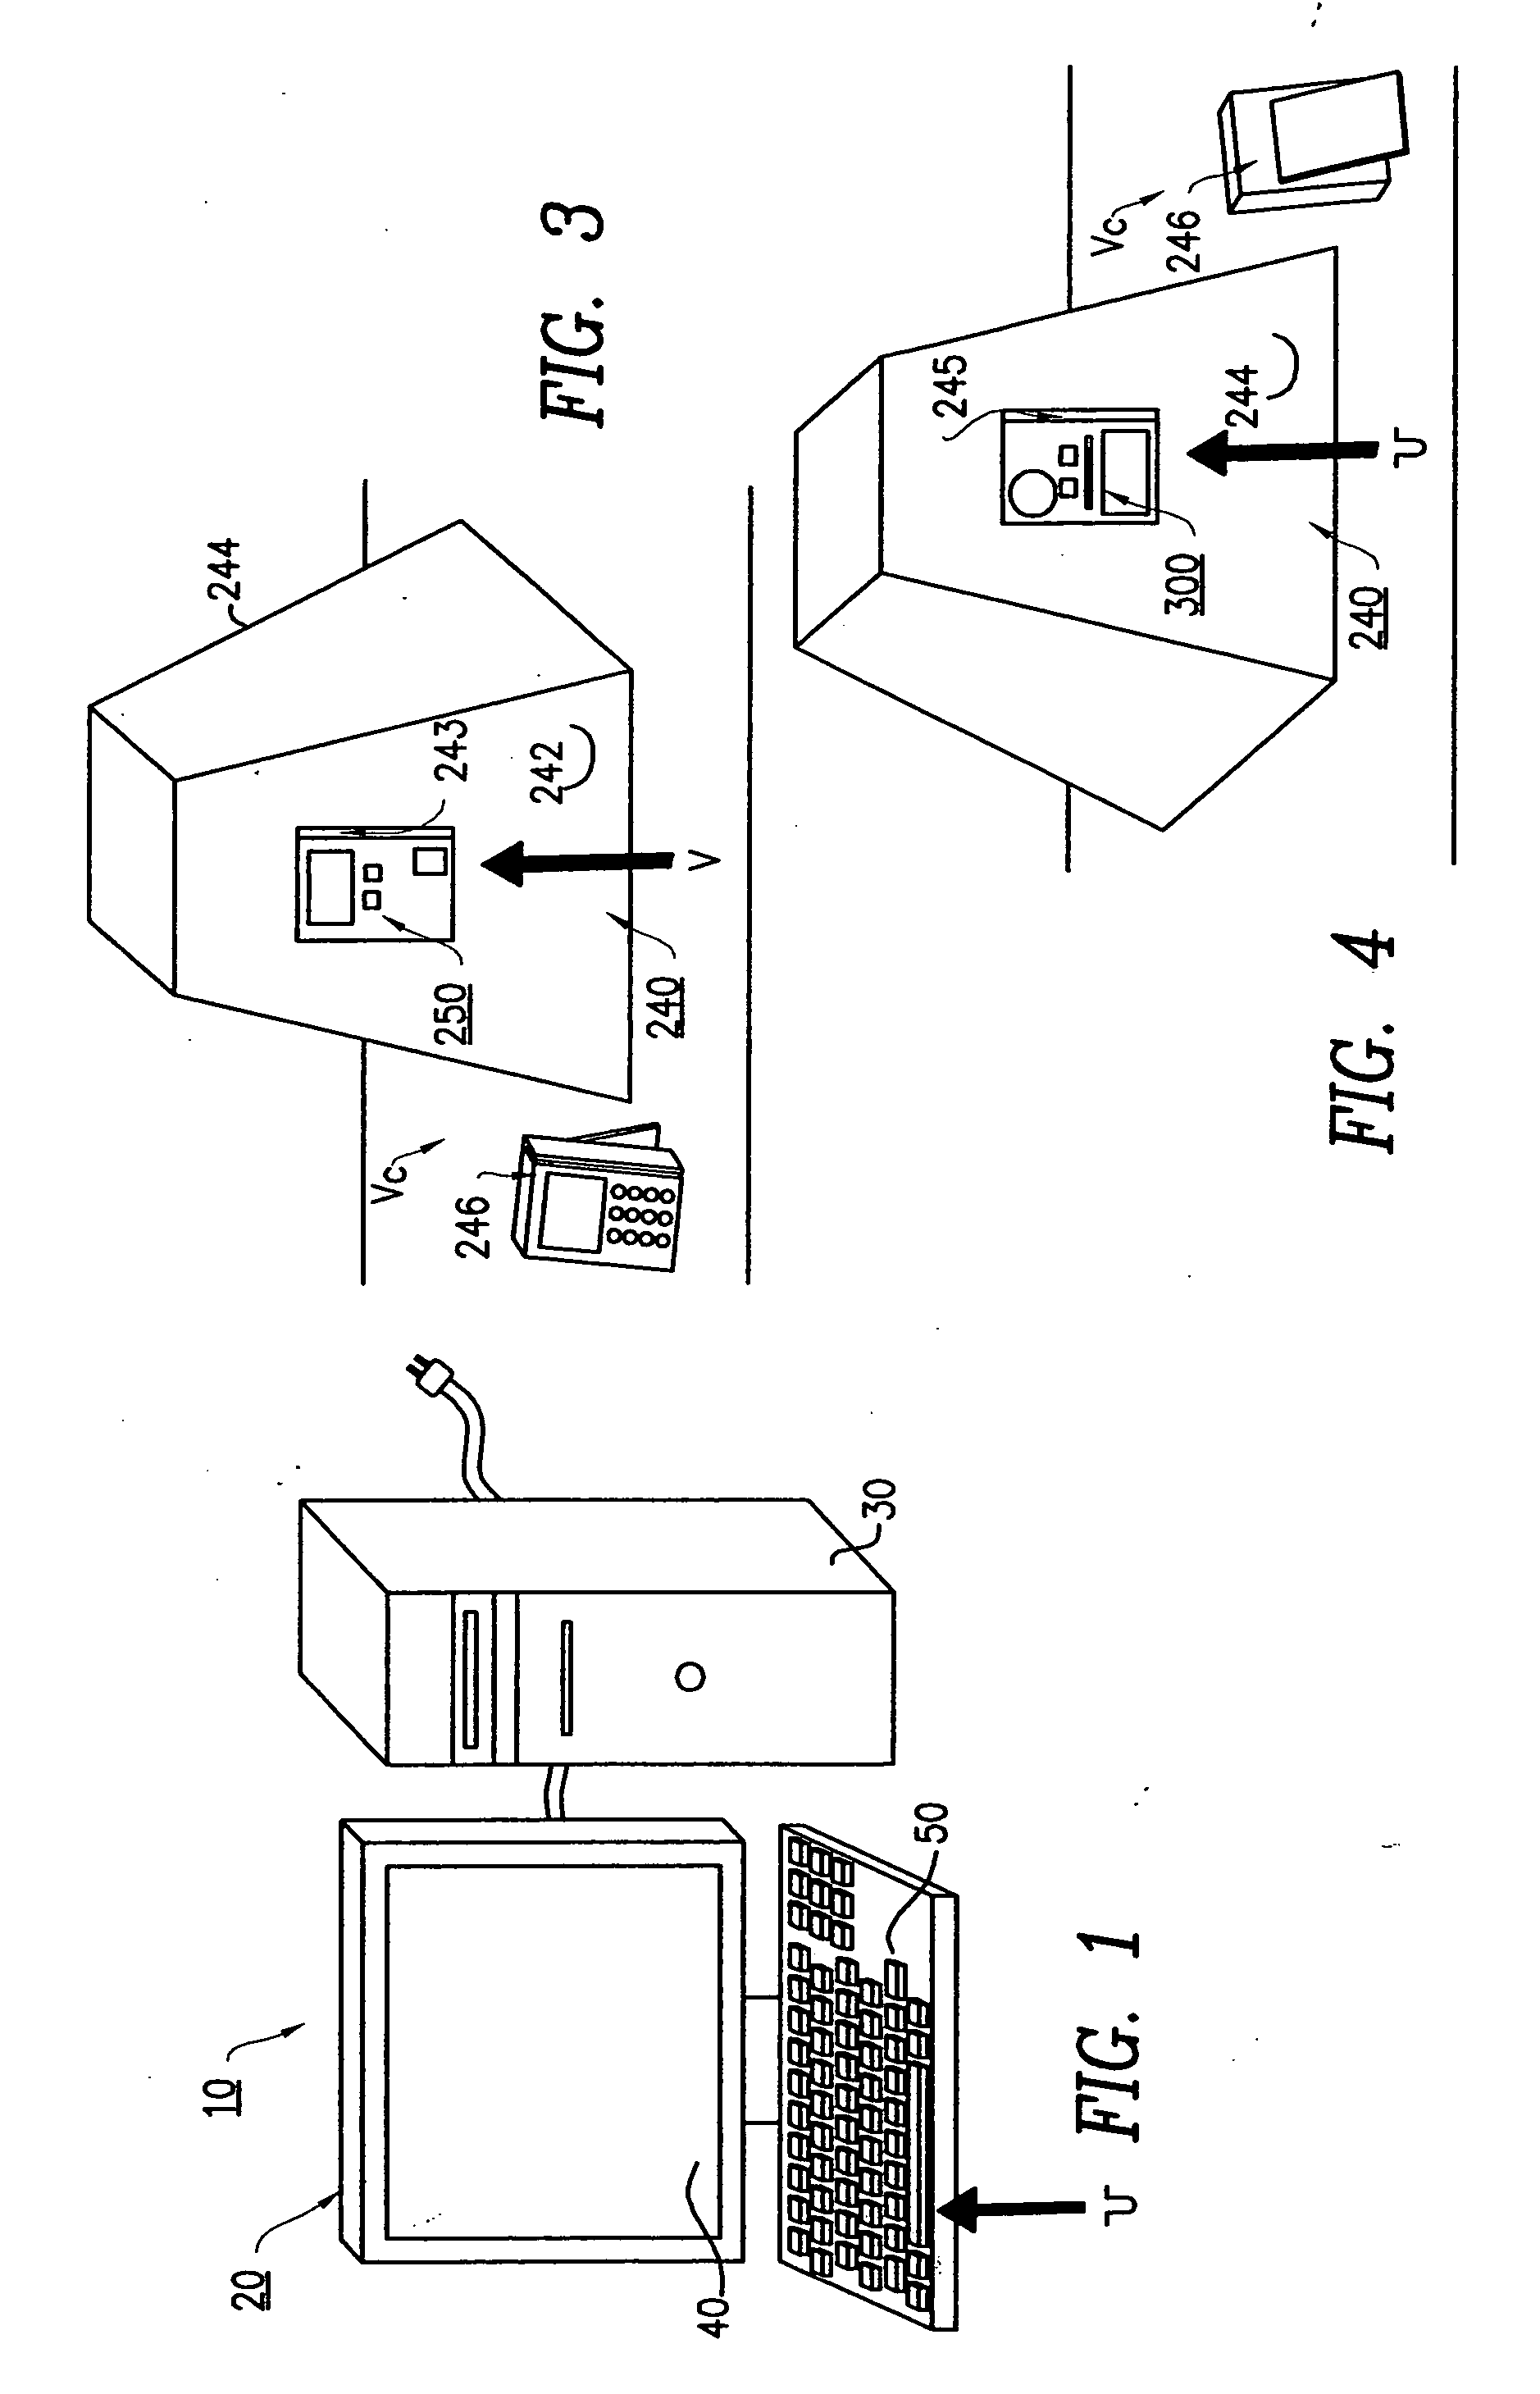 Authentication system for the authorization of a transaction using a credit card, ATM card, or secured personal ID card